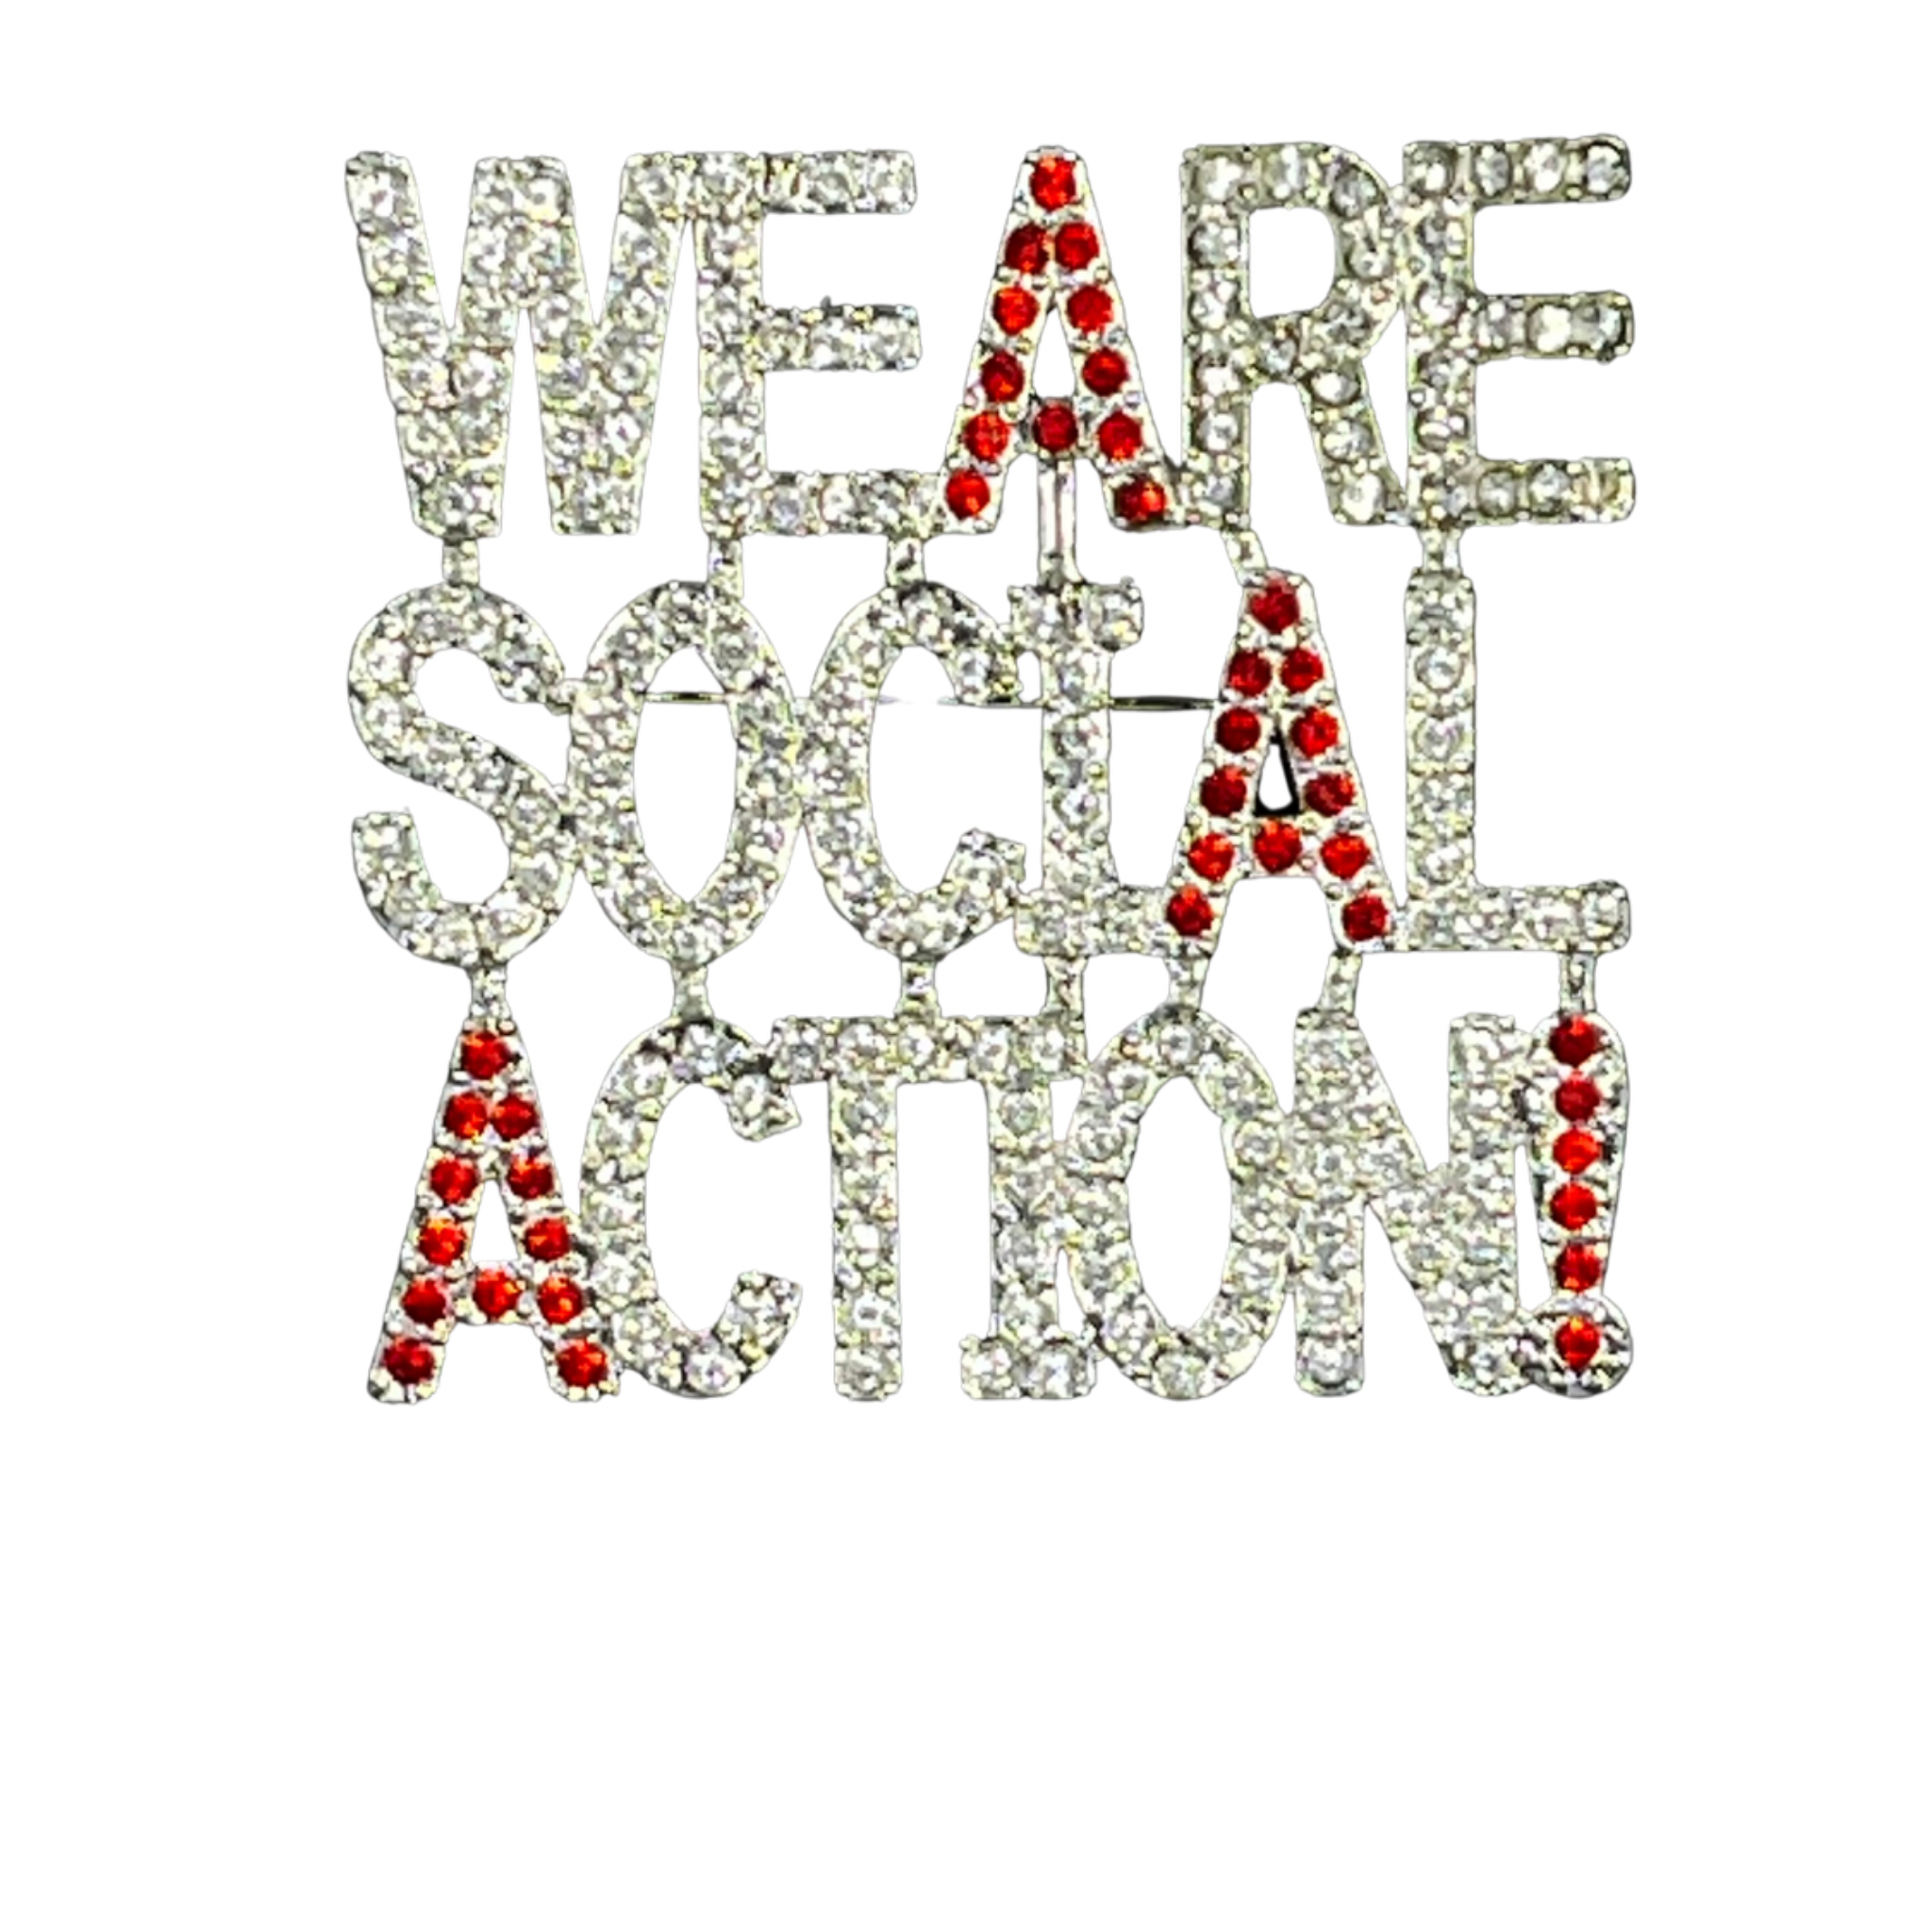 We Are Social Action Brooch